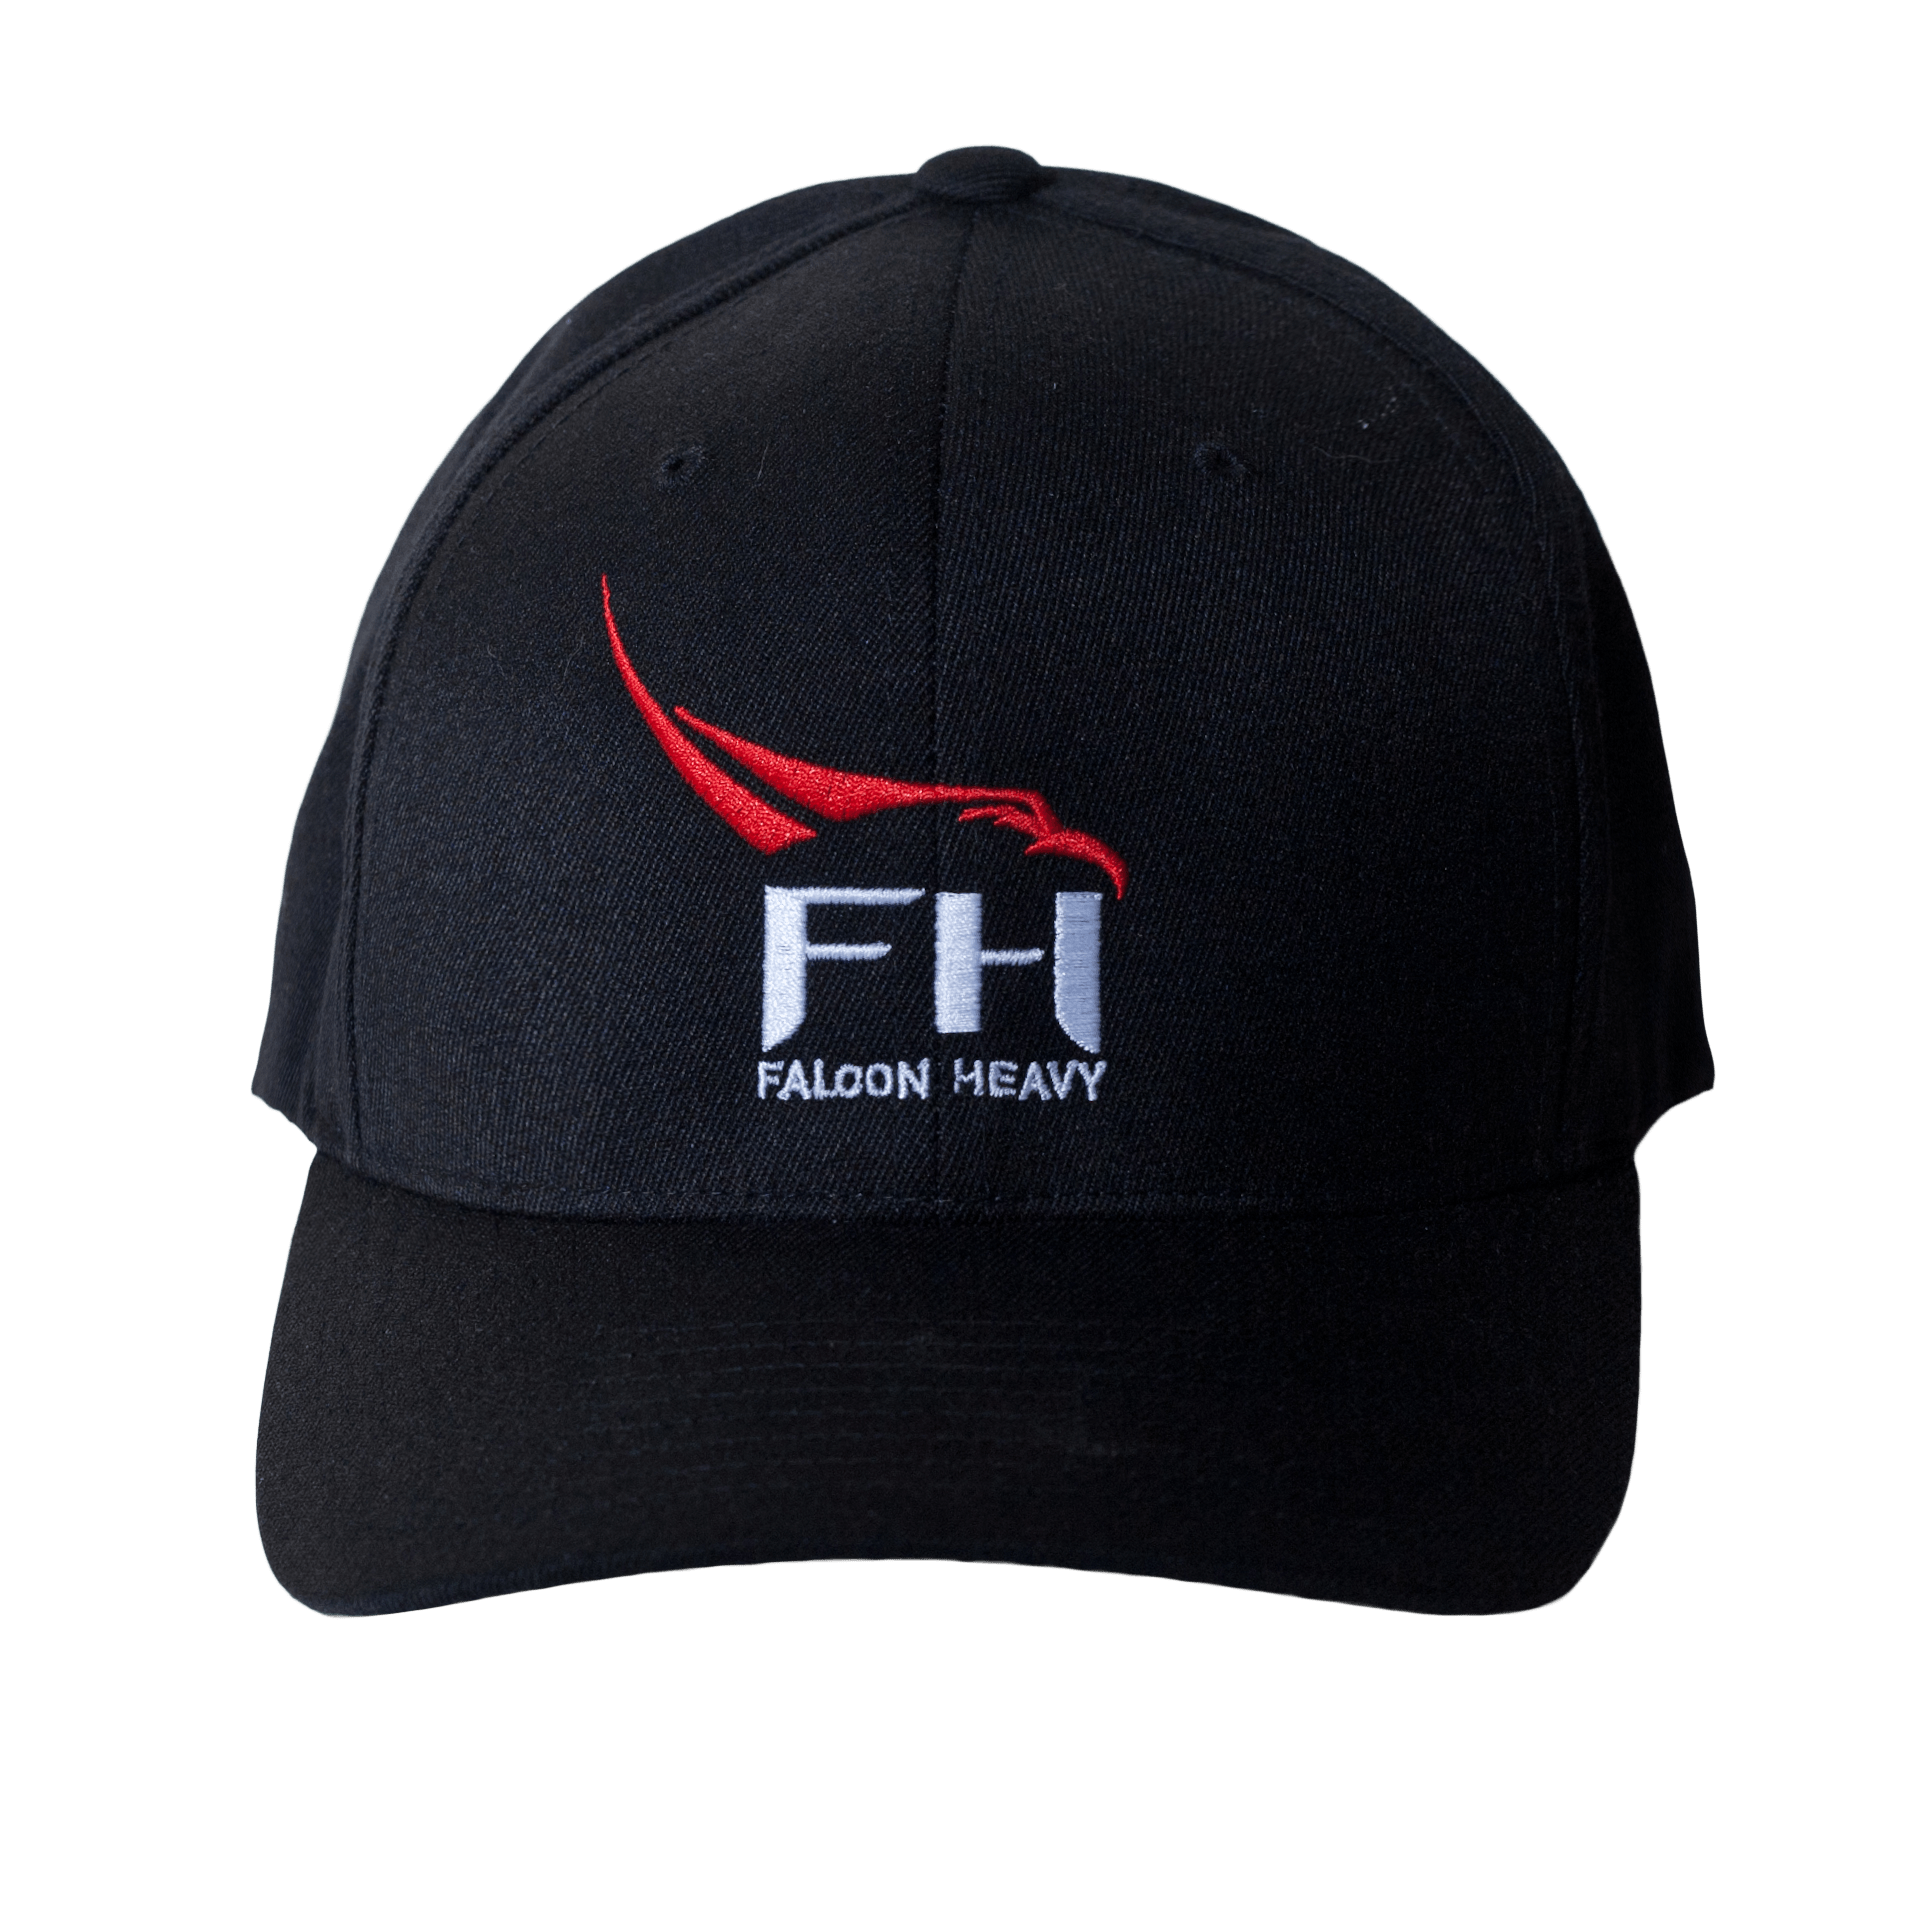 Falcon Heavy Logo - Shop SPACEX FALCON HEAVY FLEXFIT CAP Online from The Space Store